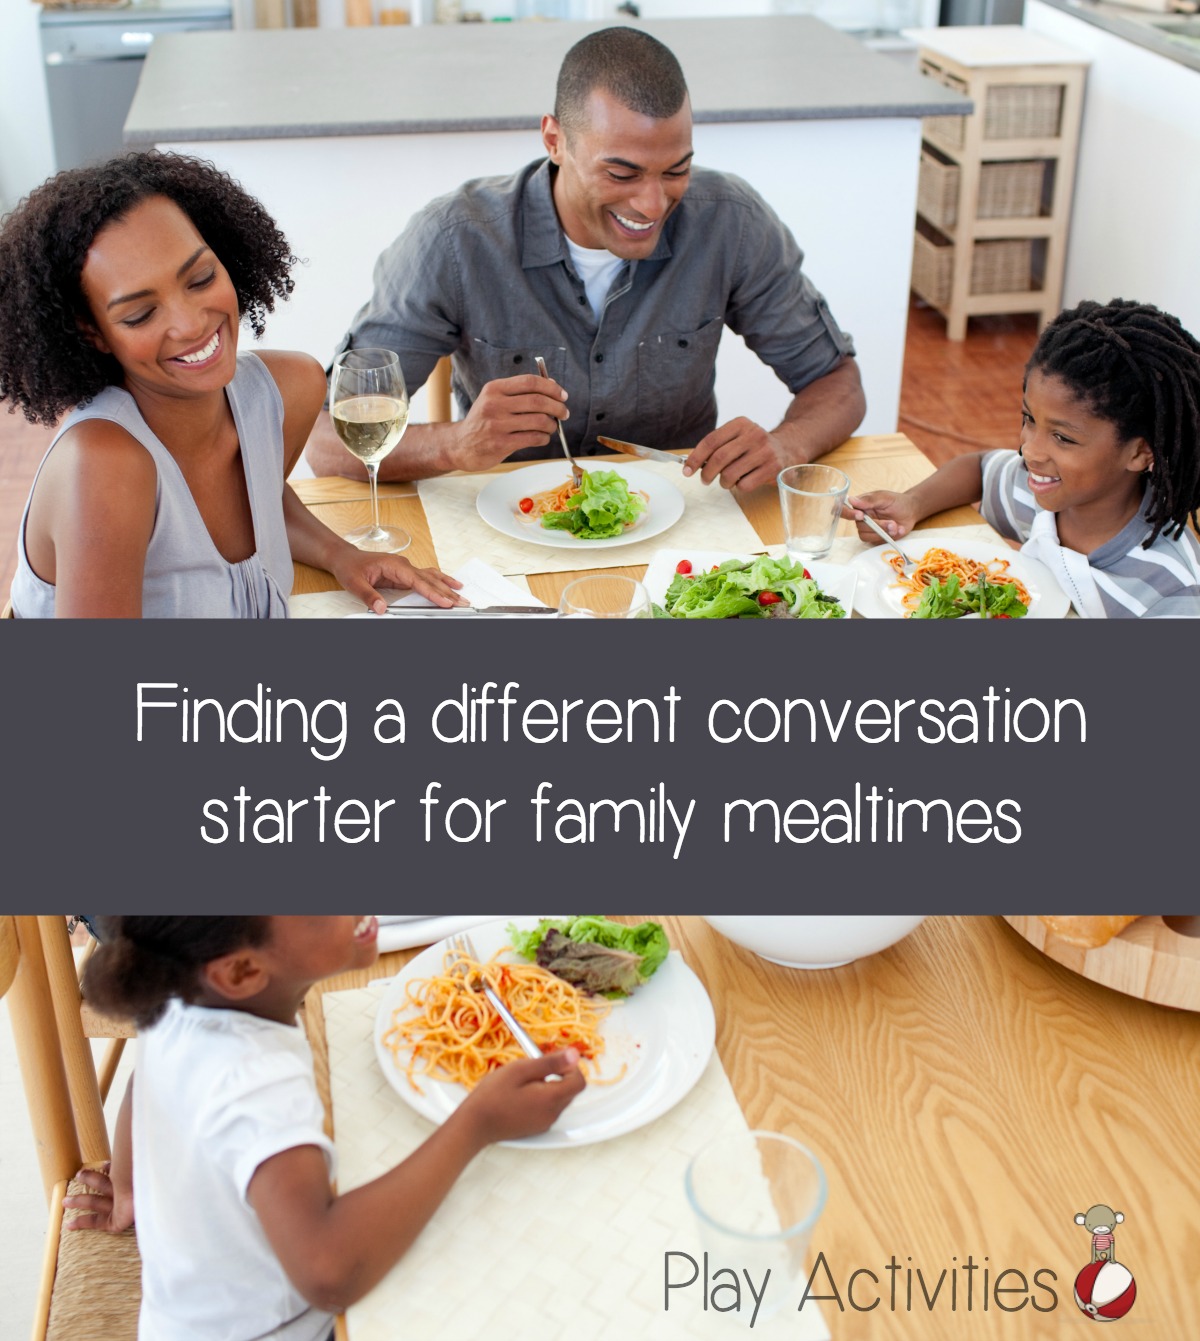 family dinner conversation starters with a difference | Play-Activities.com